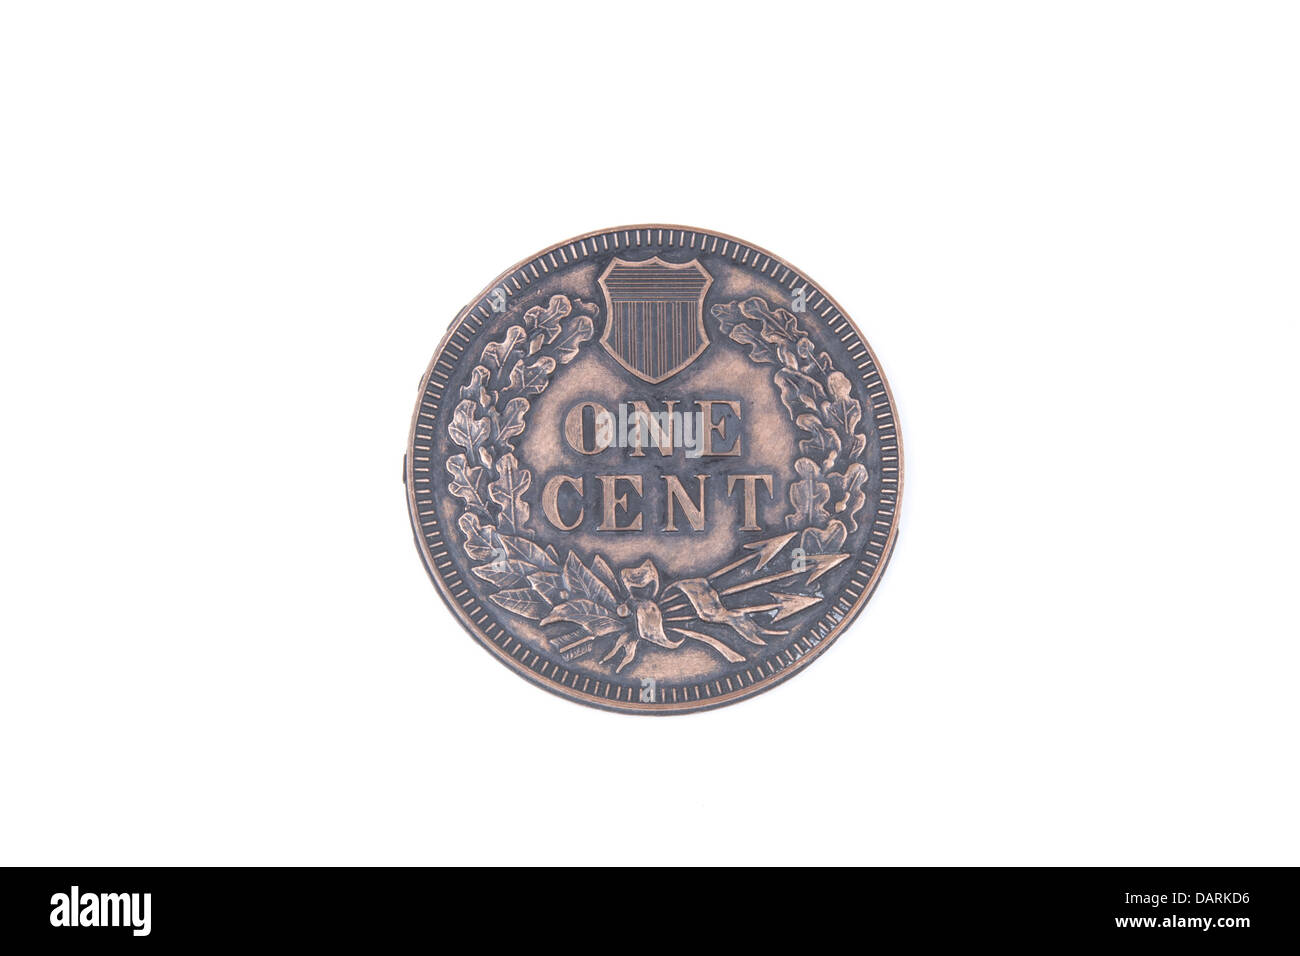 Huge Old American Cent Coin Stock Photo